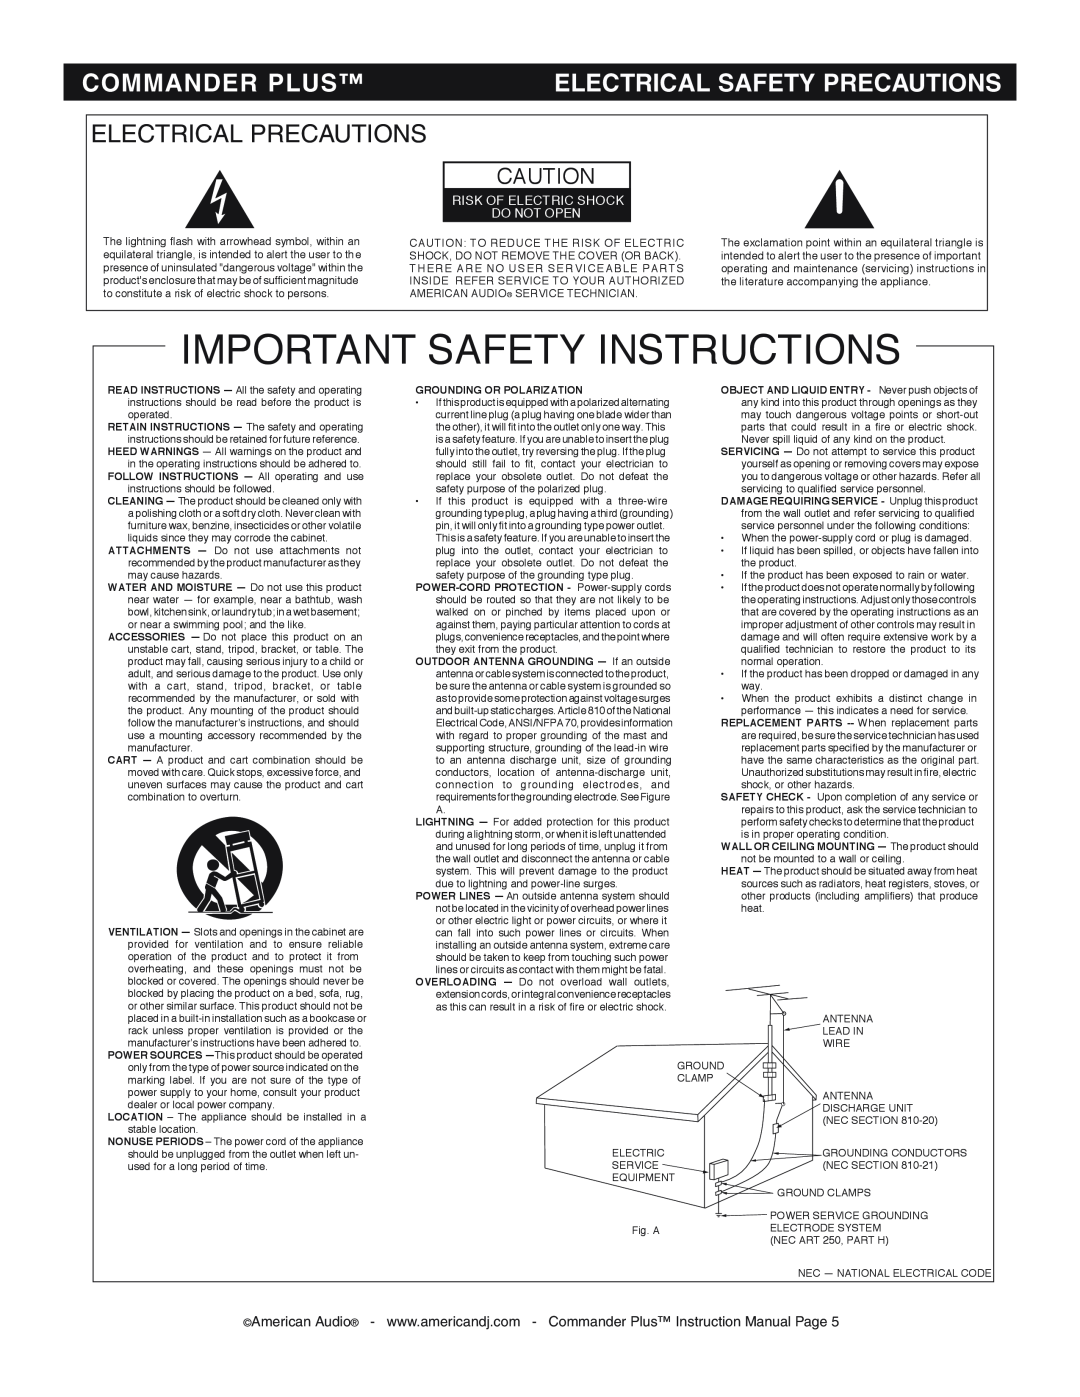 American Audio CommanderPlus manual Electrical Precautions, Important Safety Instructions, Commander Plus 